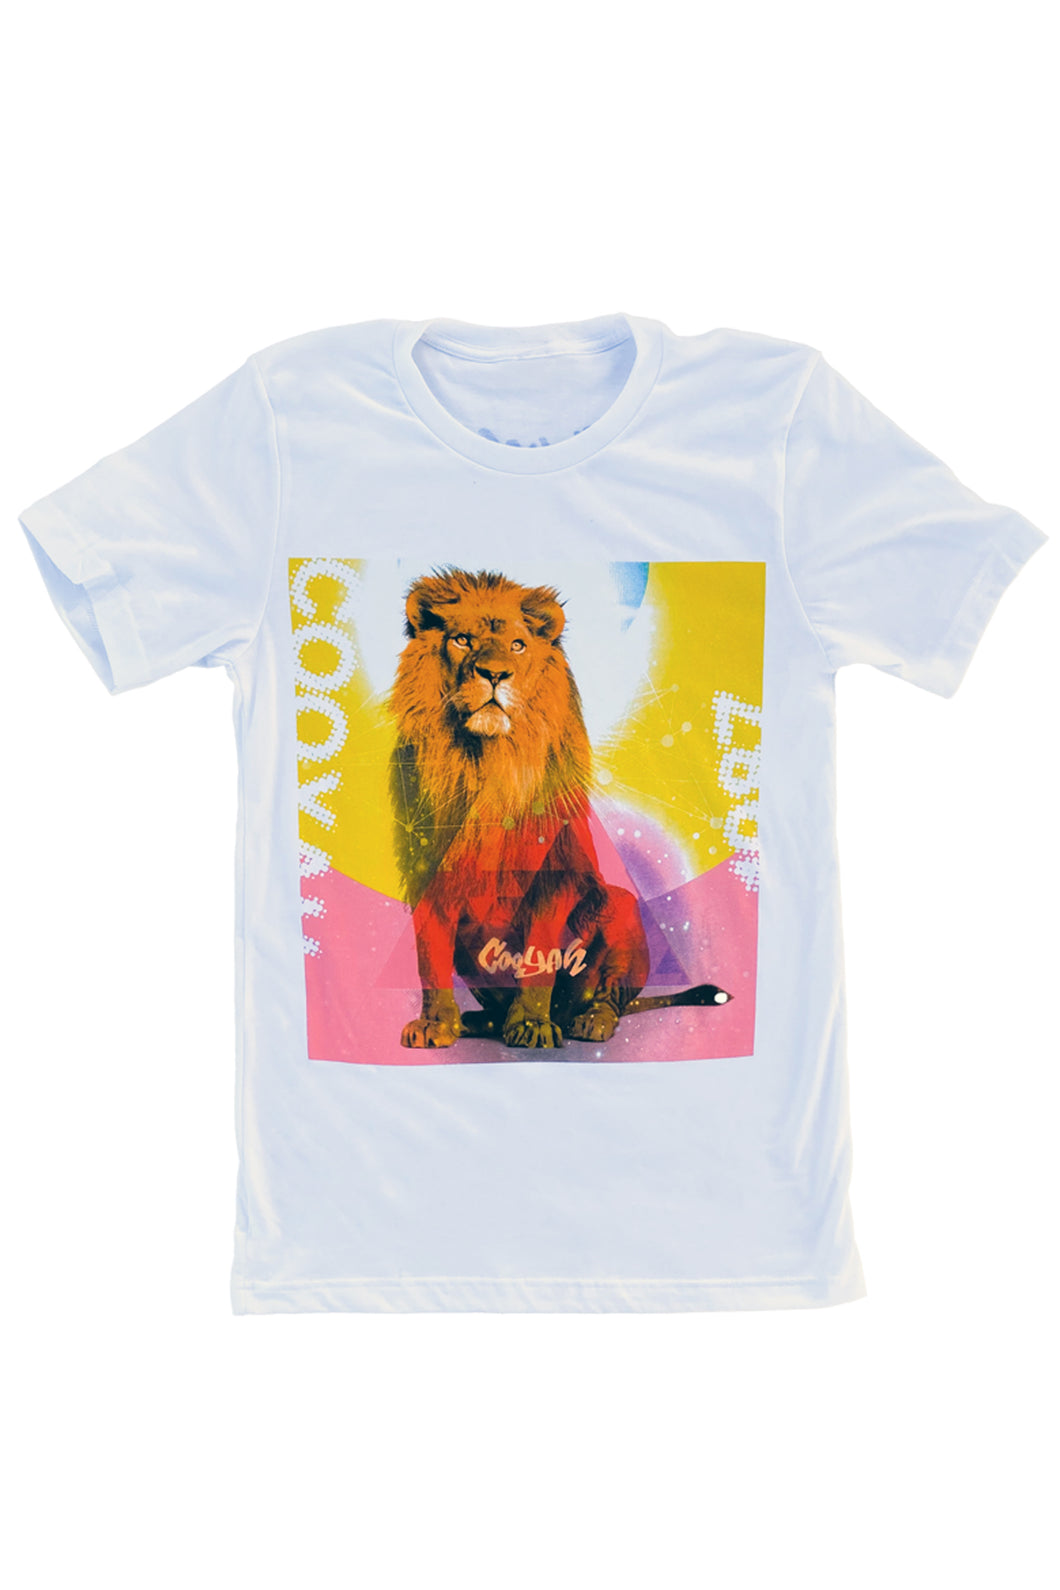 Cooyah Jamaica. Standing Lion Women's Graphic Tee in white. Jamaican streetwear clothing brand.e